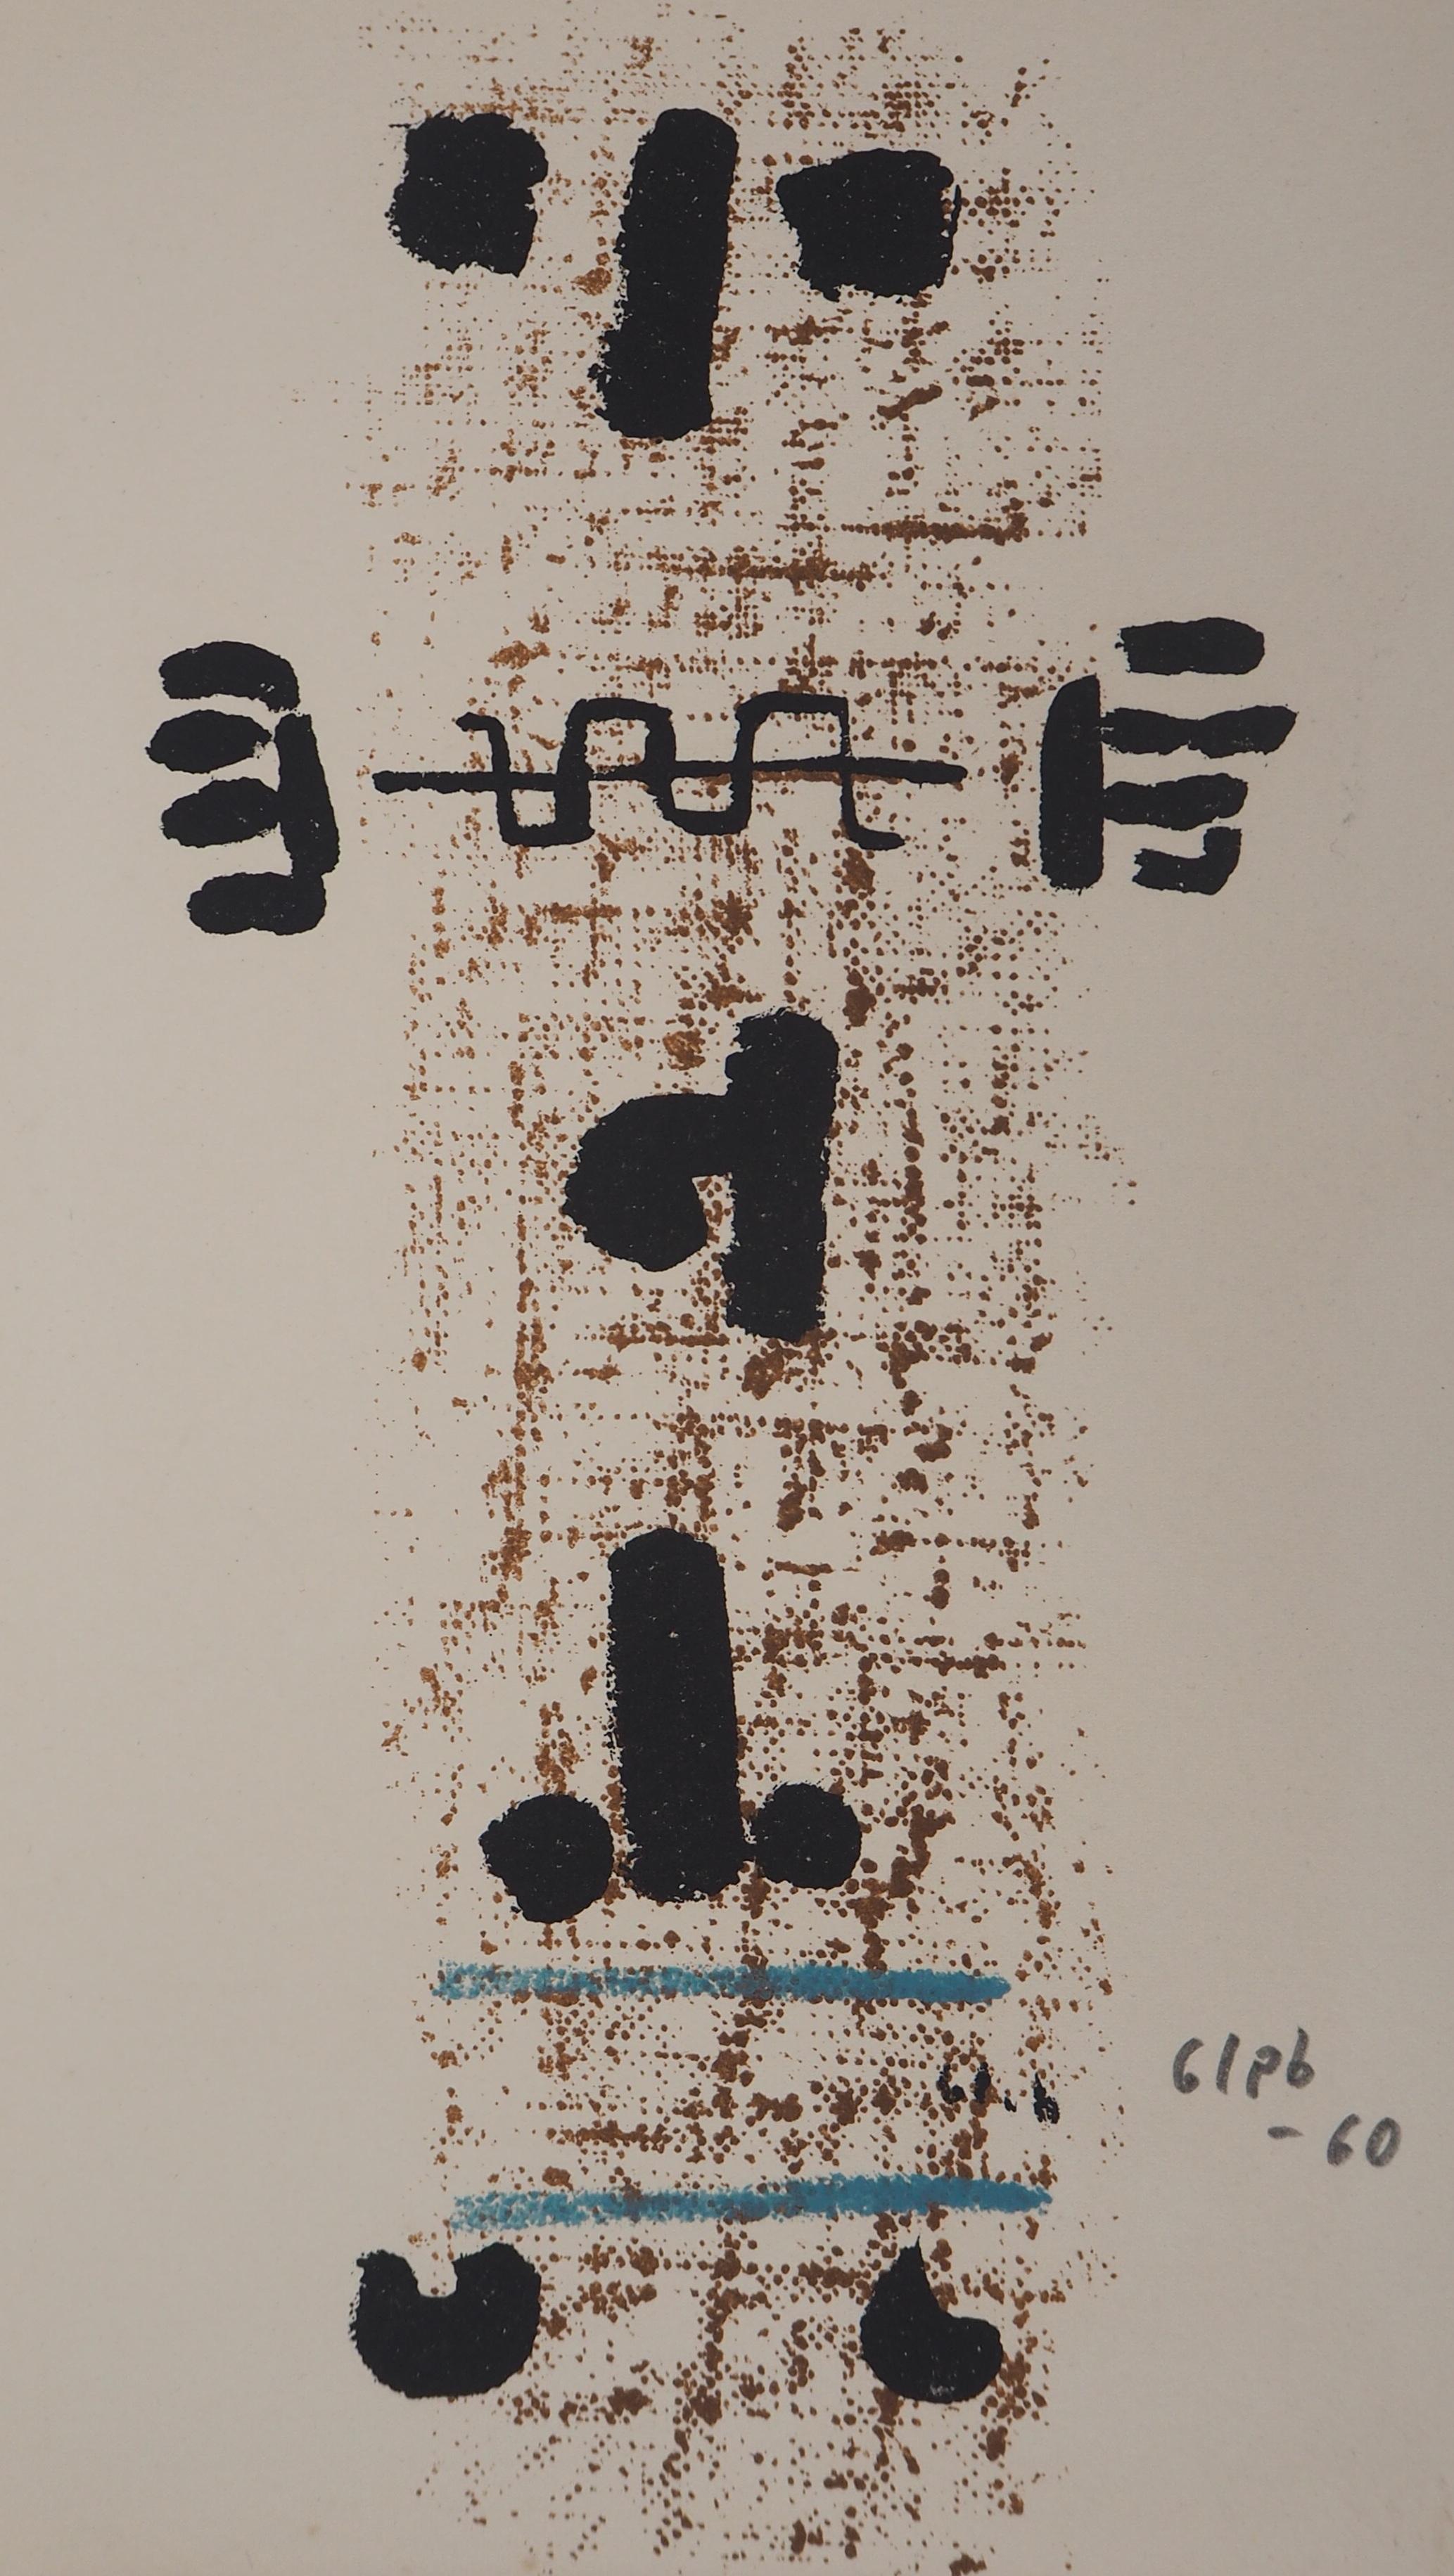 Thomas Gleb (Yehouda Chaim Kalman, called)
Art Brut, Totem, 1960

Original Lithograph
Signed in pencil
Dated (19)60
On vellum 25 x 16.5 cm (c. 10 x 6.5 in)

Excellent condition